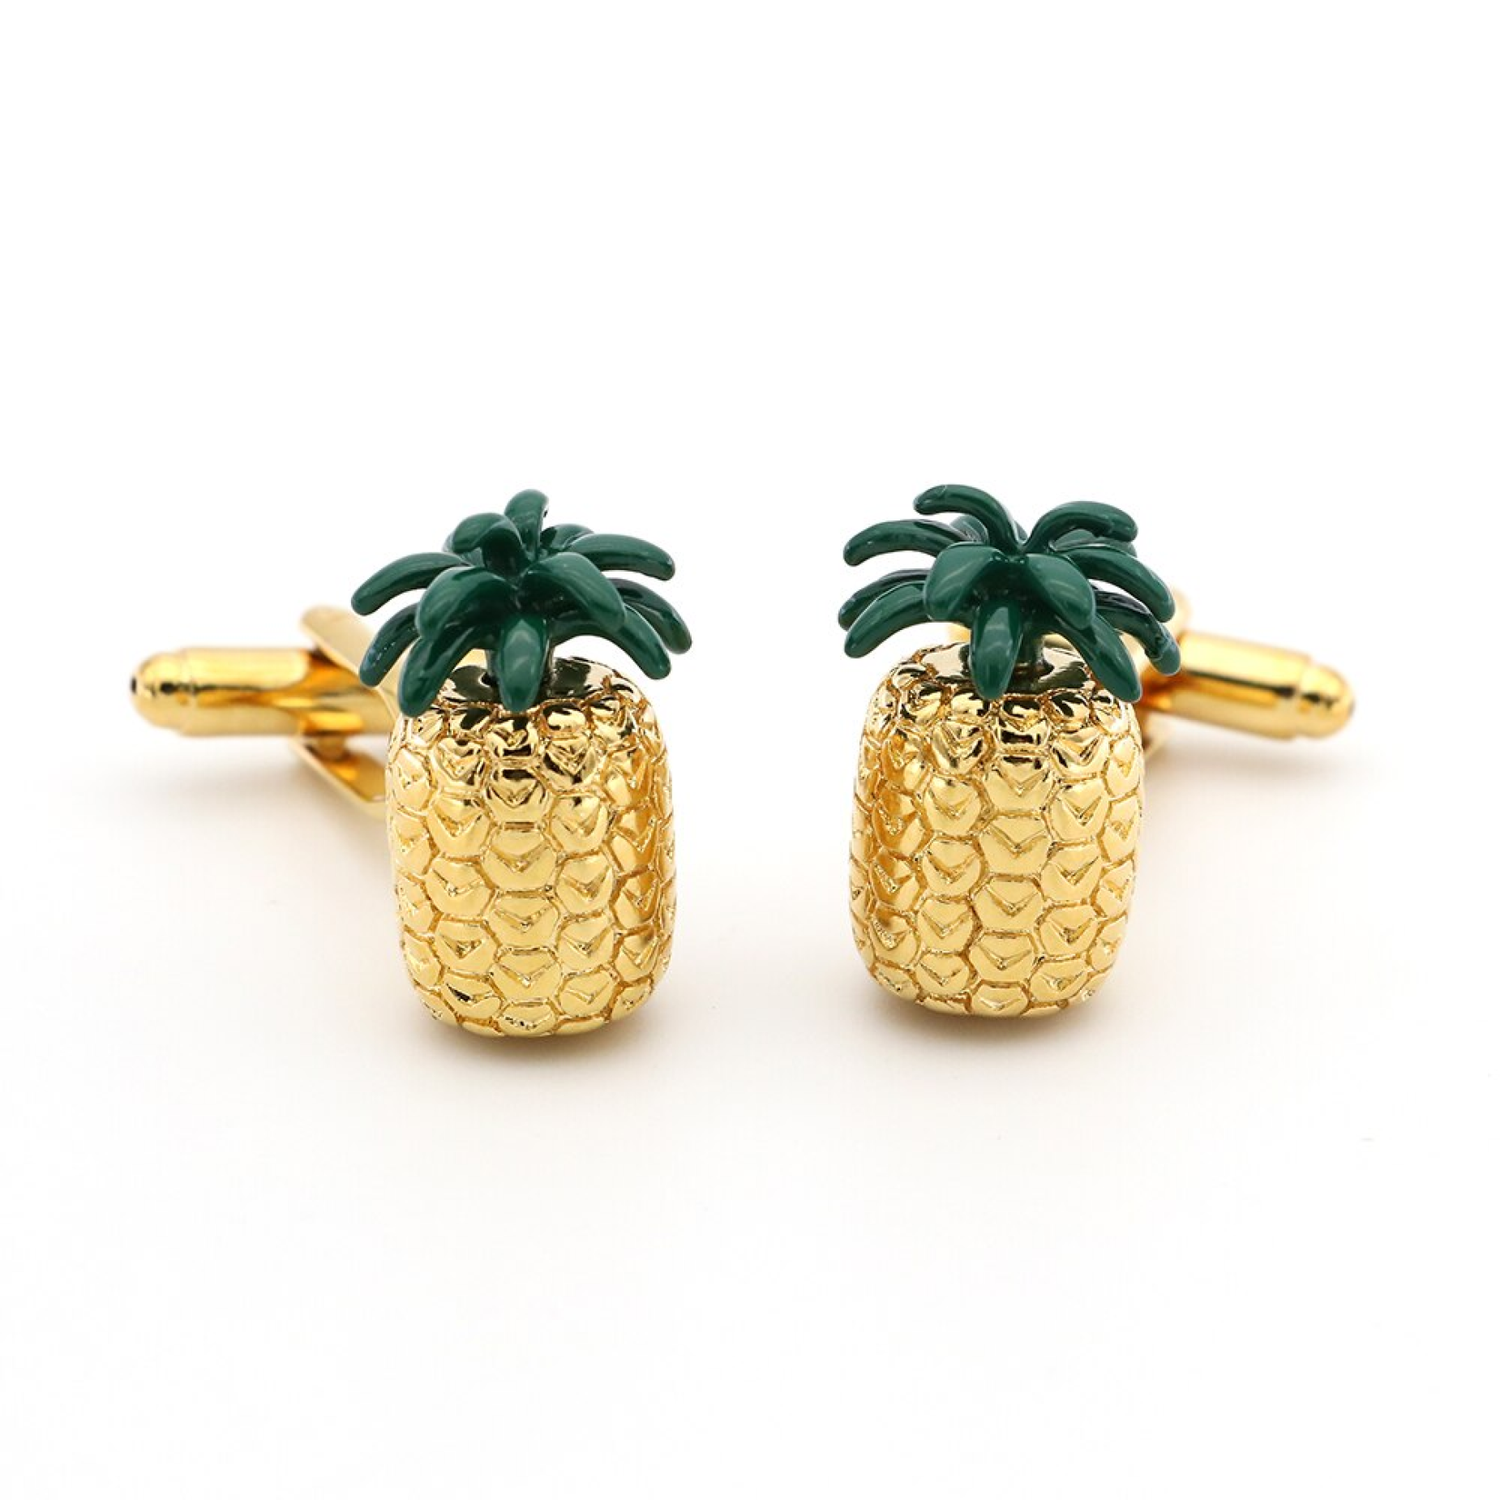 Gold and Green Colored Pineapple Cufflinks